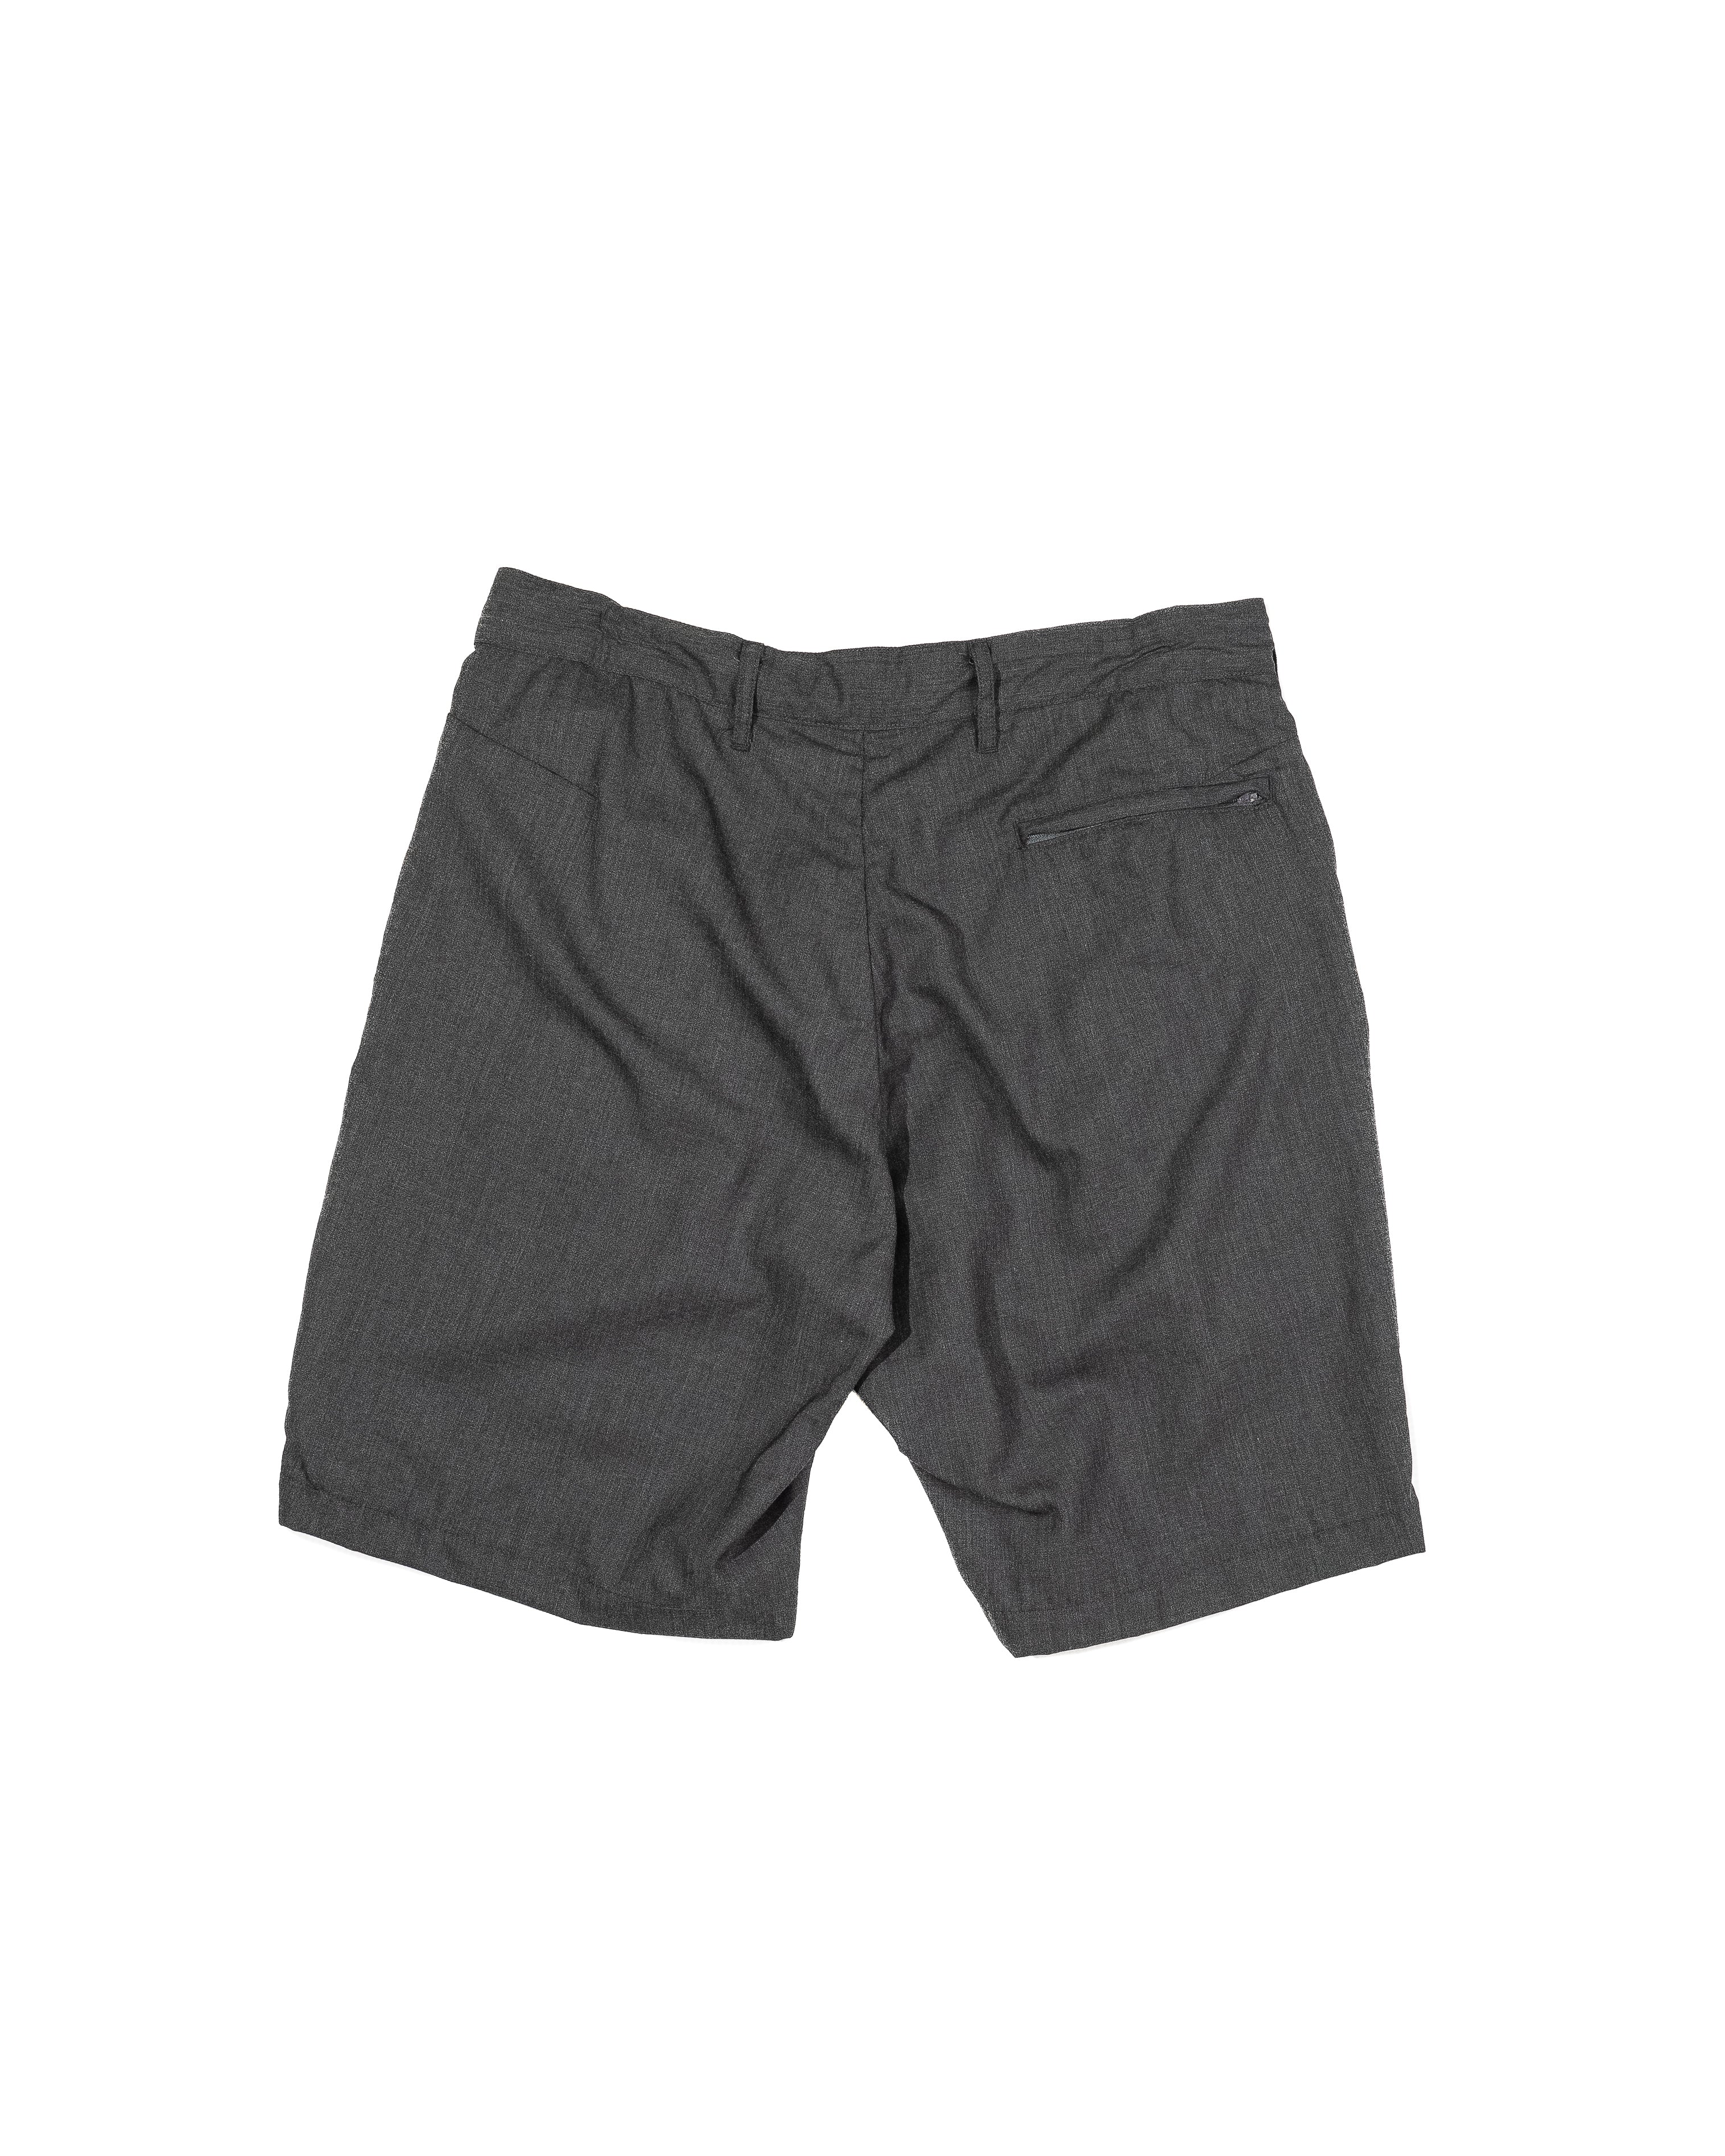 Sunset Short - Charcoal Tropical Wool